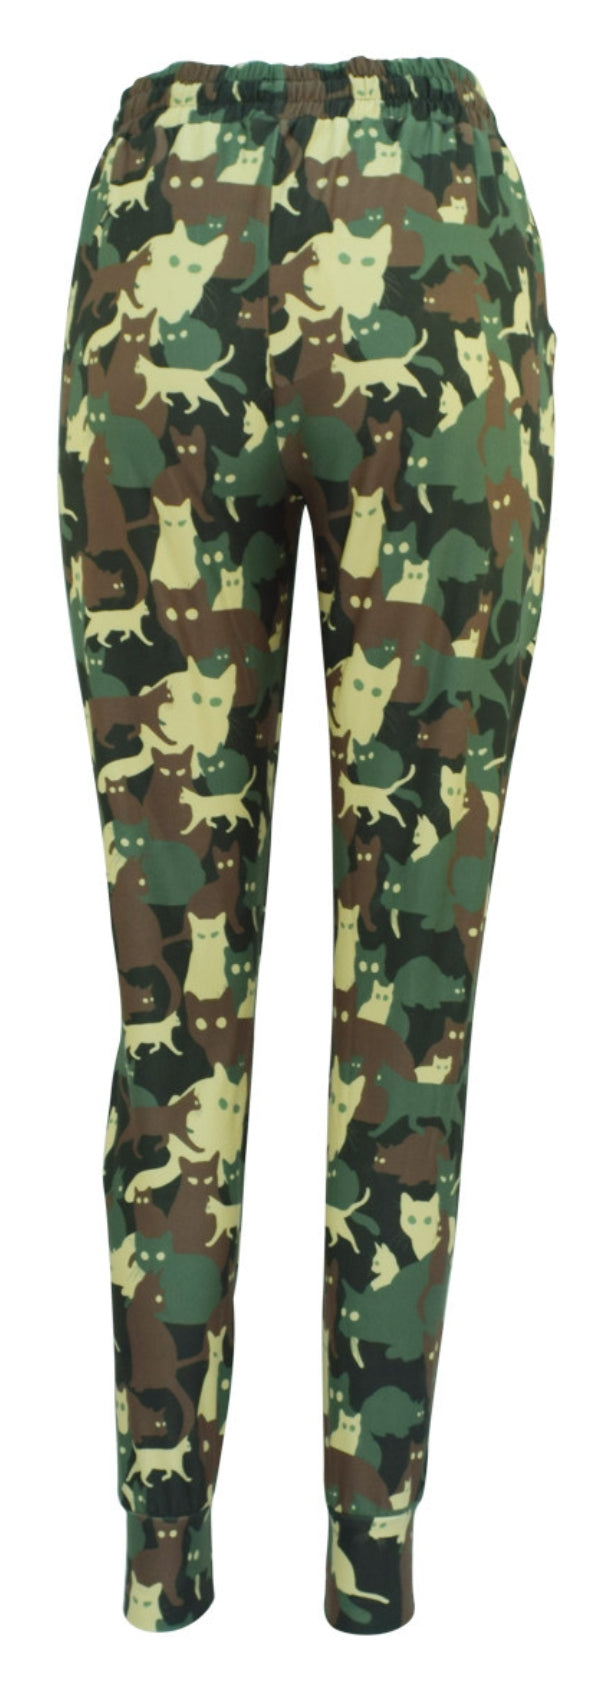 Catoflage Lejoggers-Joggers